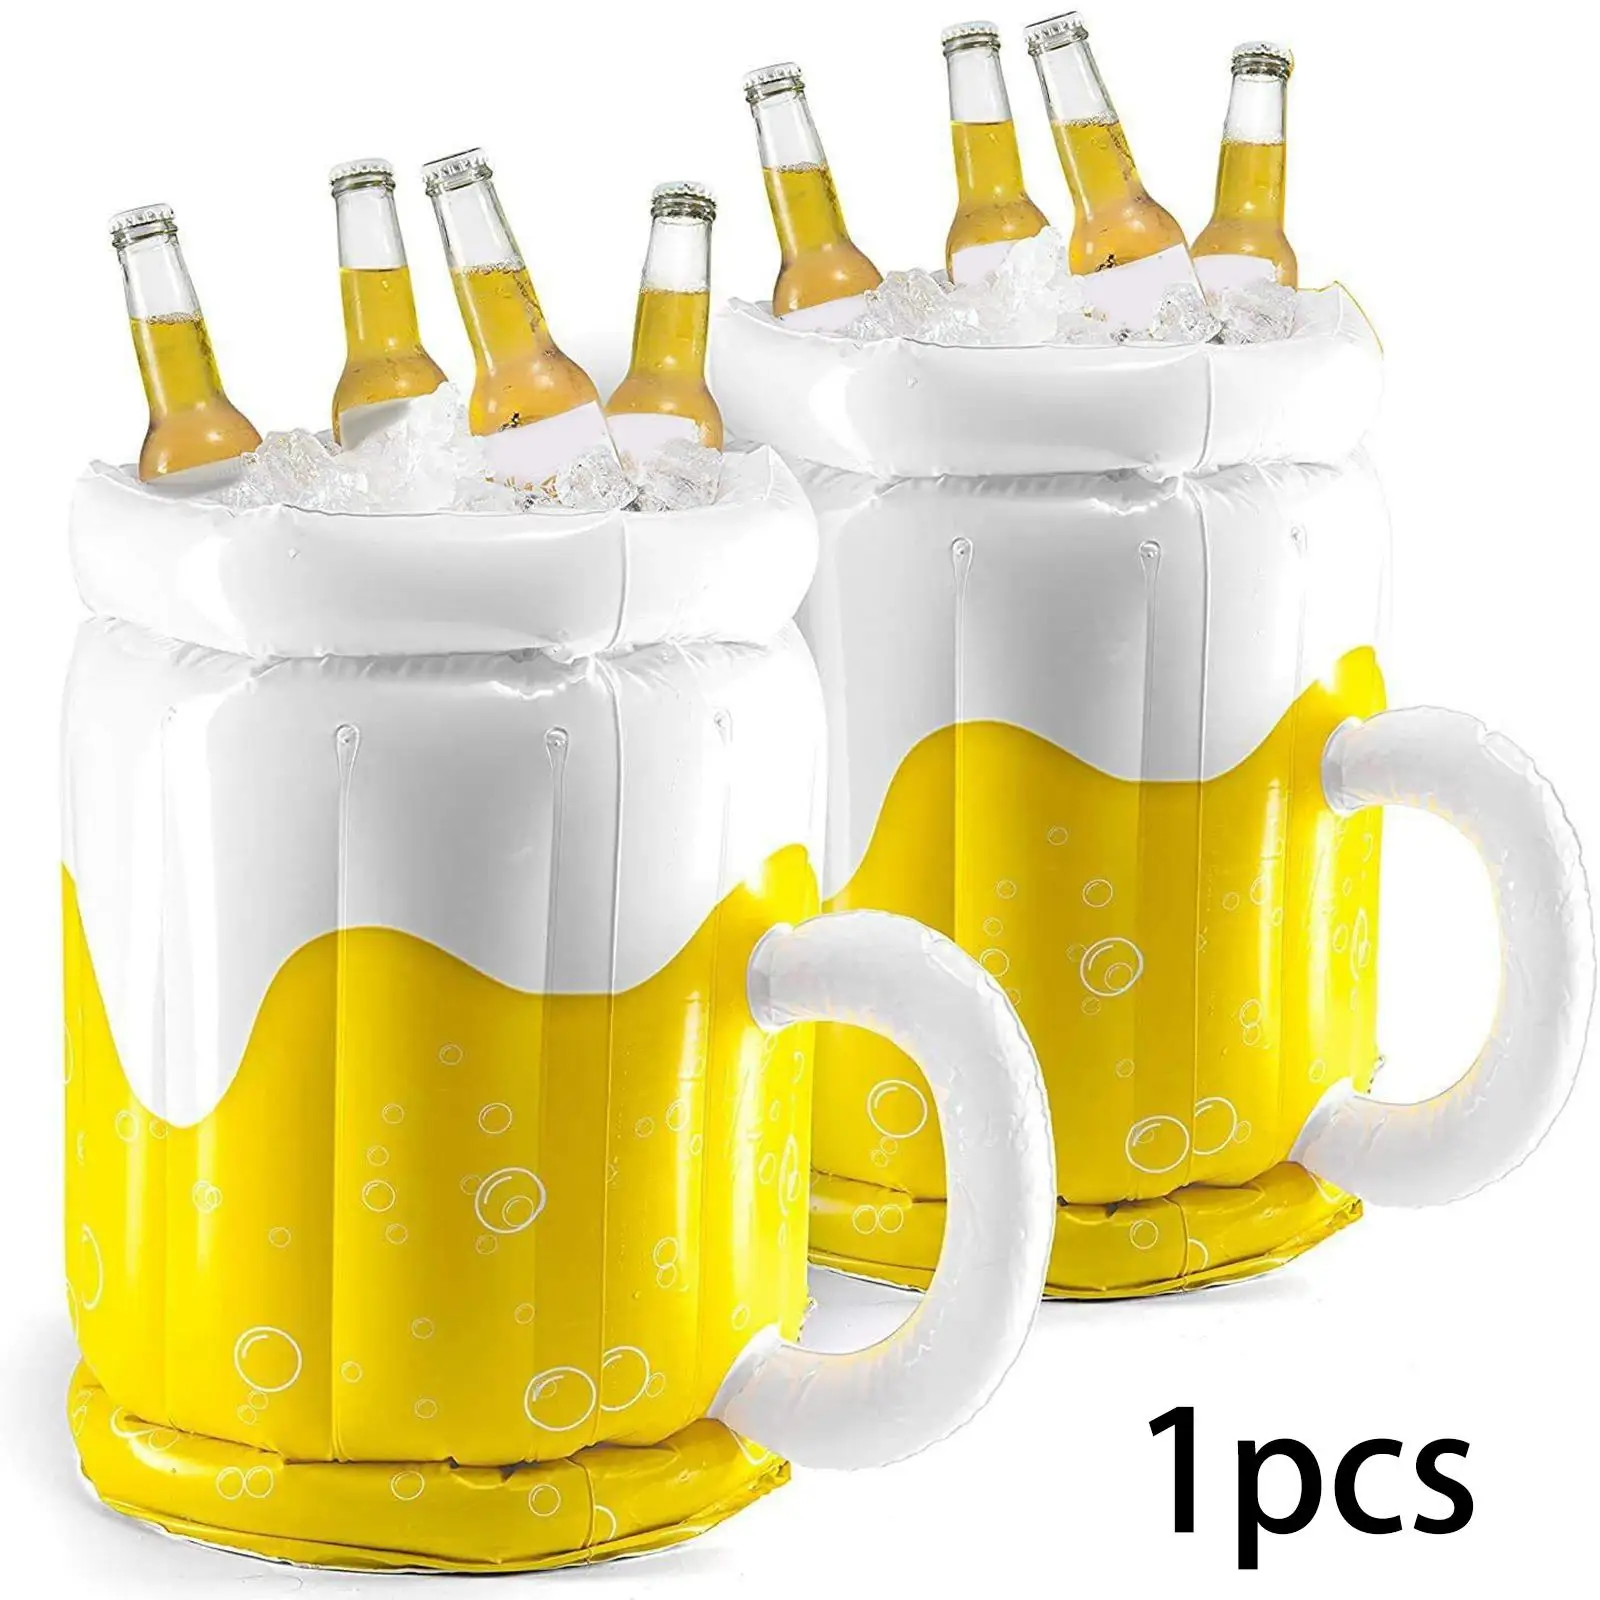 Inflatable Beer Mug Cooler Buffet Cooler Portable Drink Cooler Ice Bucket for Pool Party Decorations BBQ Picnic Camping Outdoor